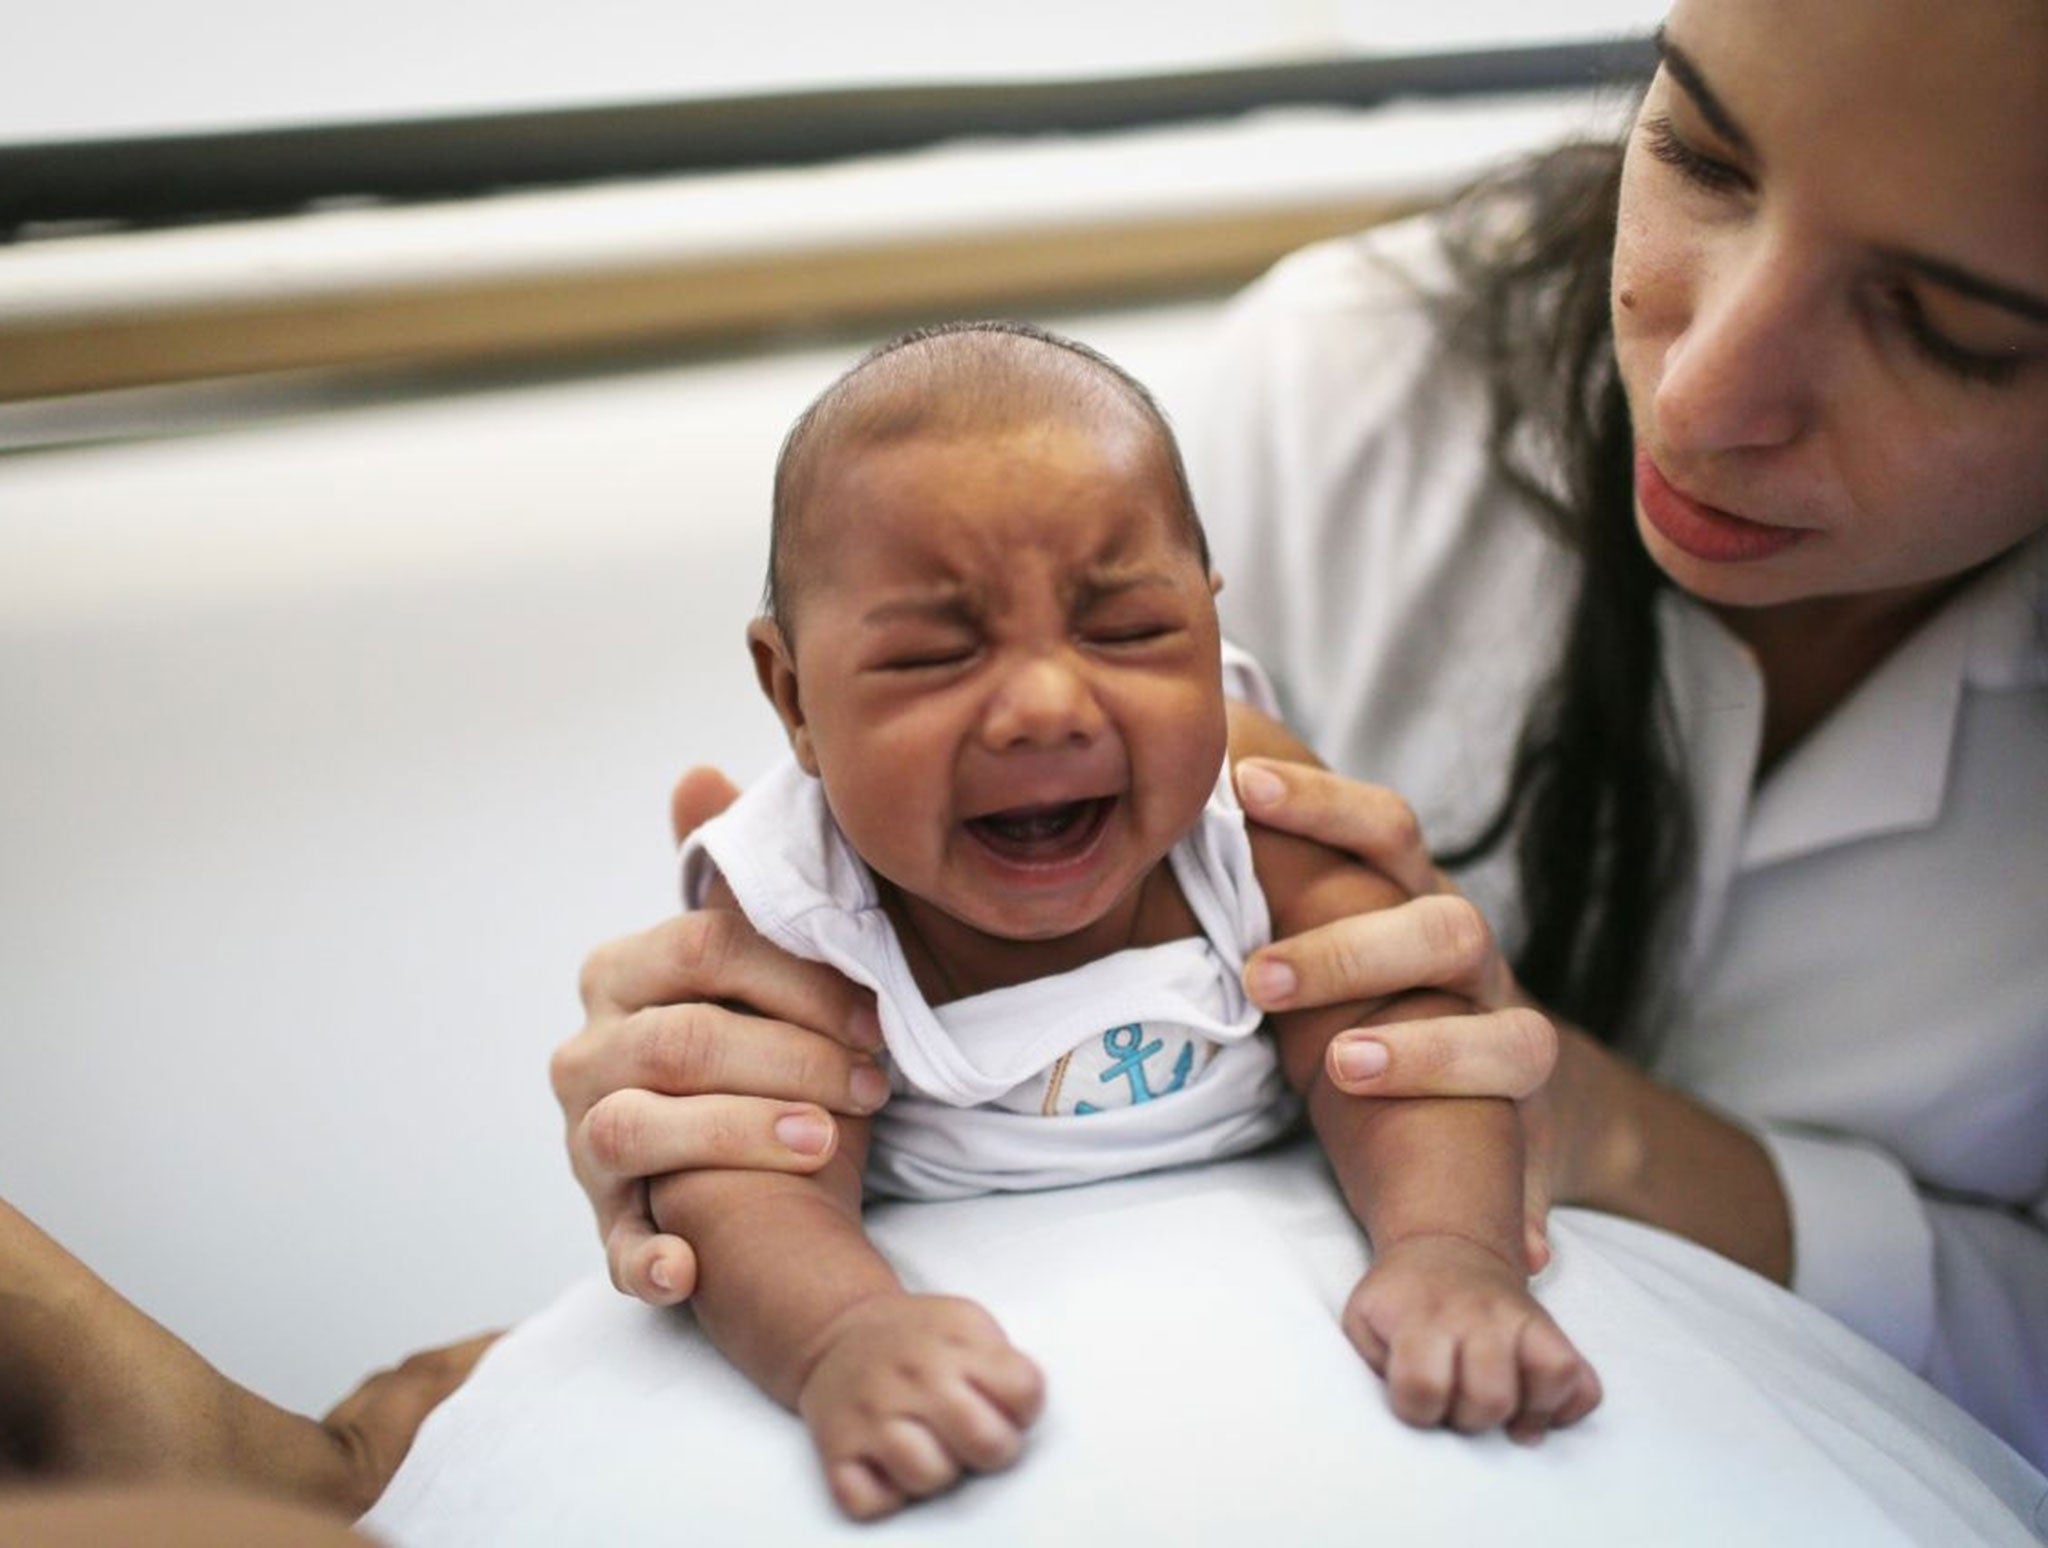 Dr. Valeria Barros treats a 6-week old baby born with microcephaly at the Lessa de Andrade polyclinic during a physical therapy session on January 29, 2016 in Recife, Pernambuco state, Brazil.